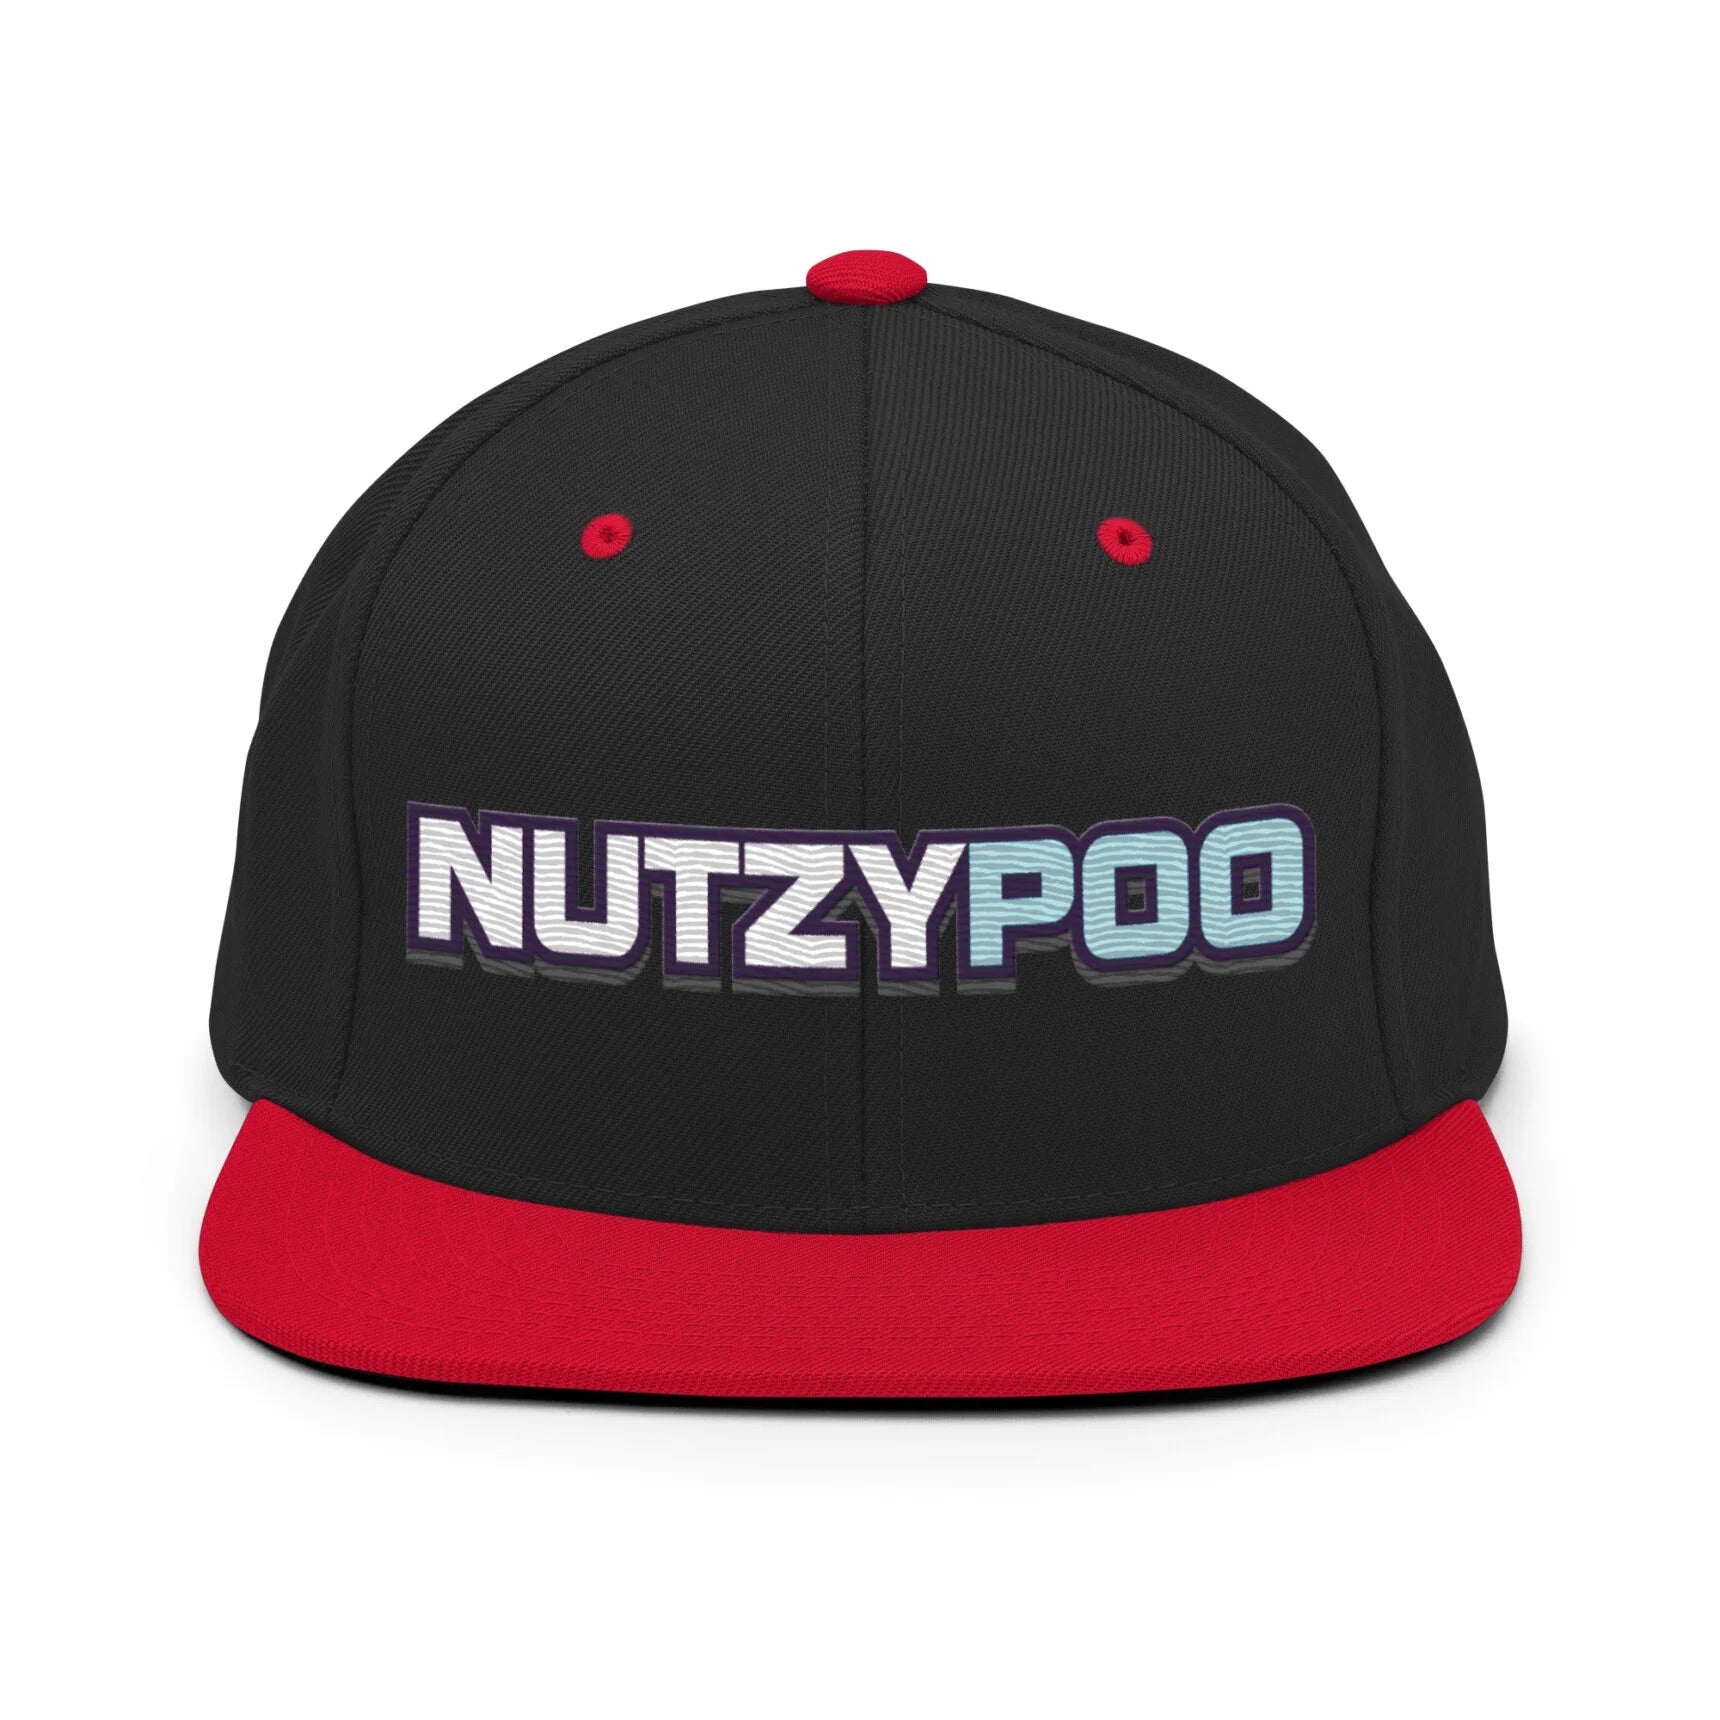 NutzyPoo ShowZone hat in black with red brim and accents